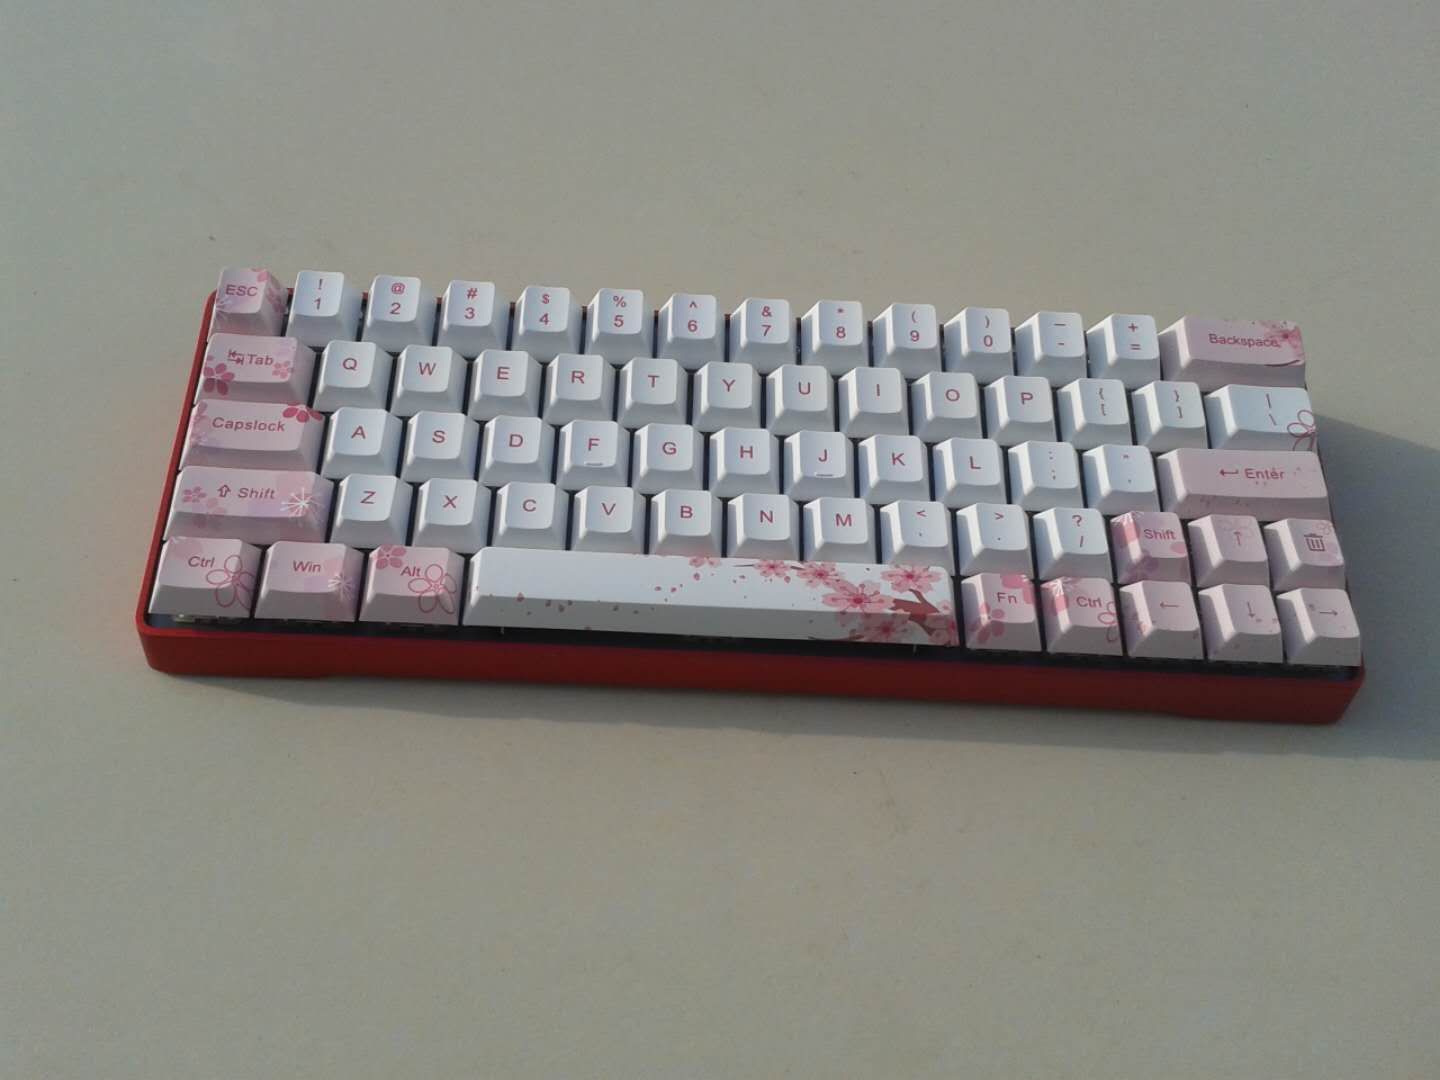 1520780865-iGK64-custom-mechanical-keyboard-with-red-aluminium-alloy-case-and-pbt-blossom-keycaps.jpg